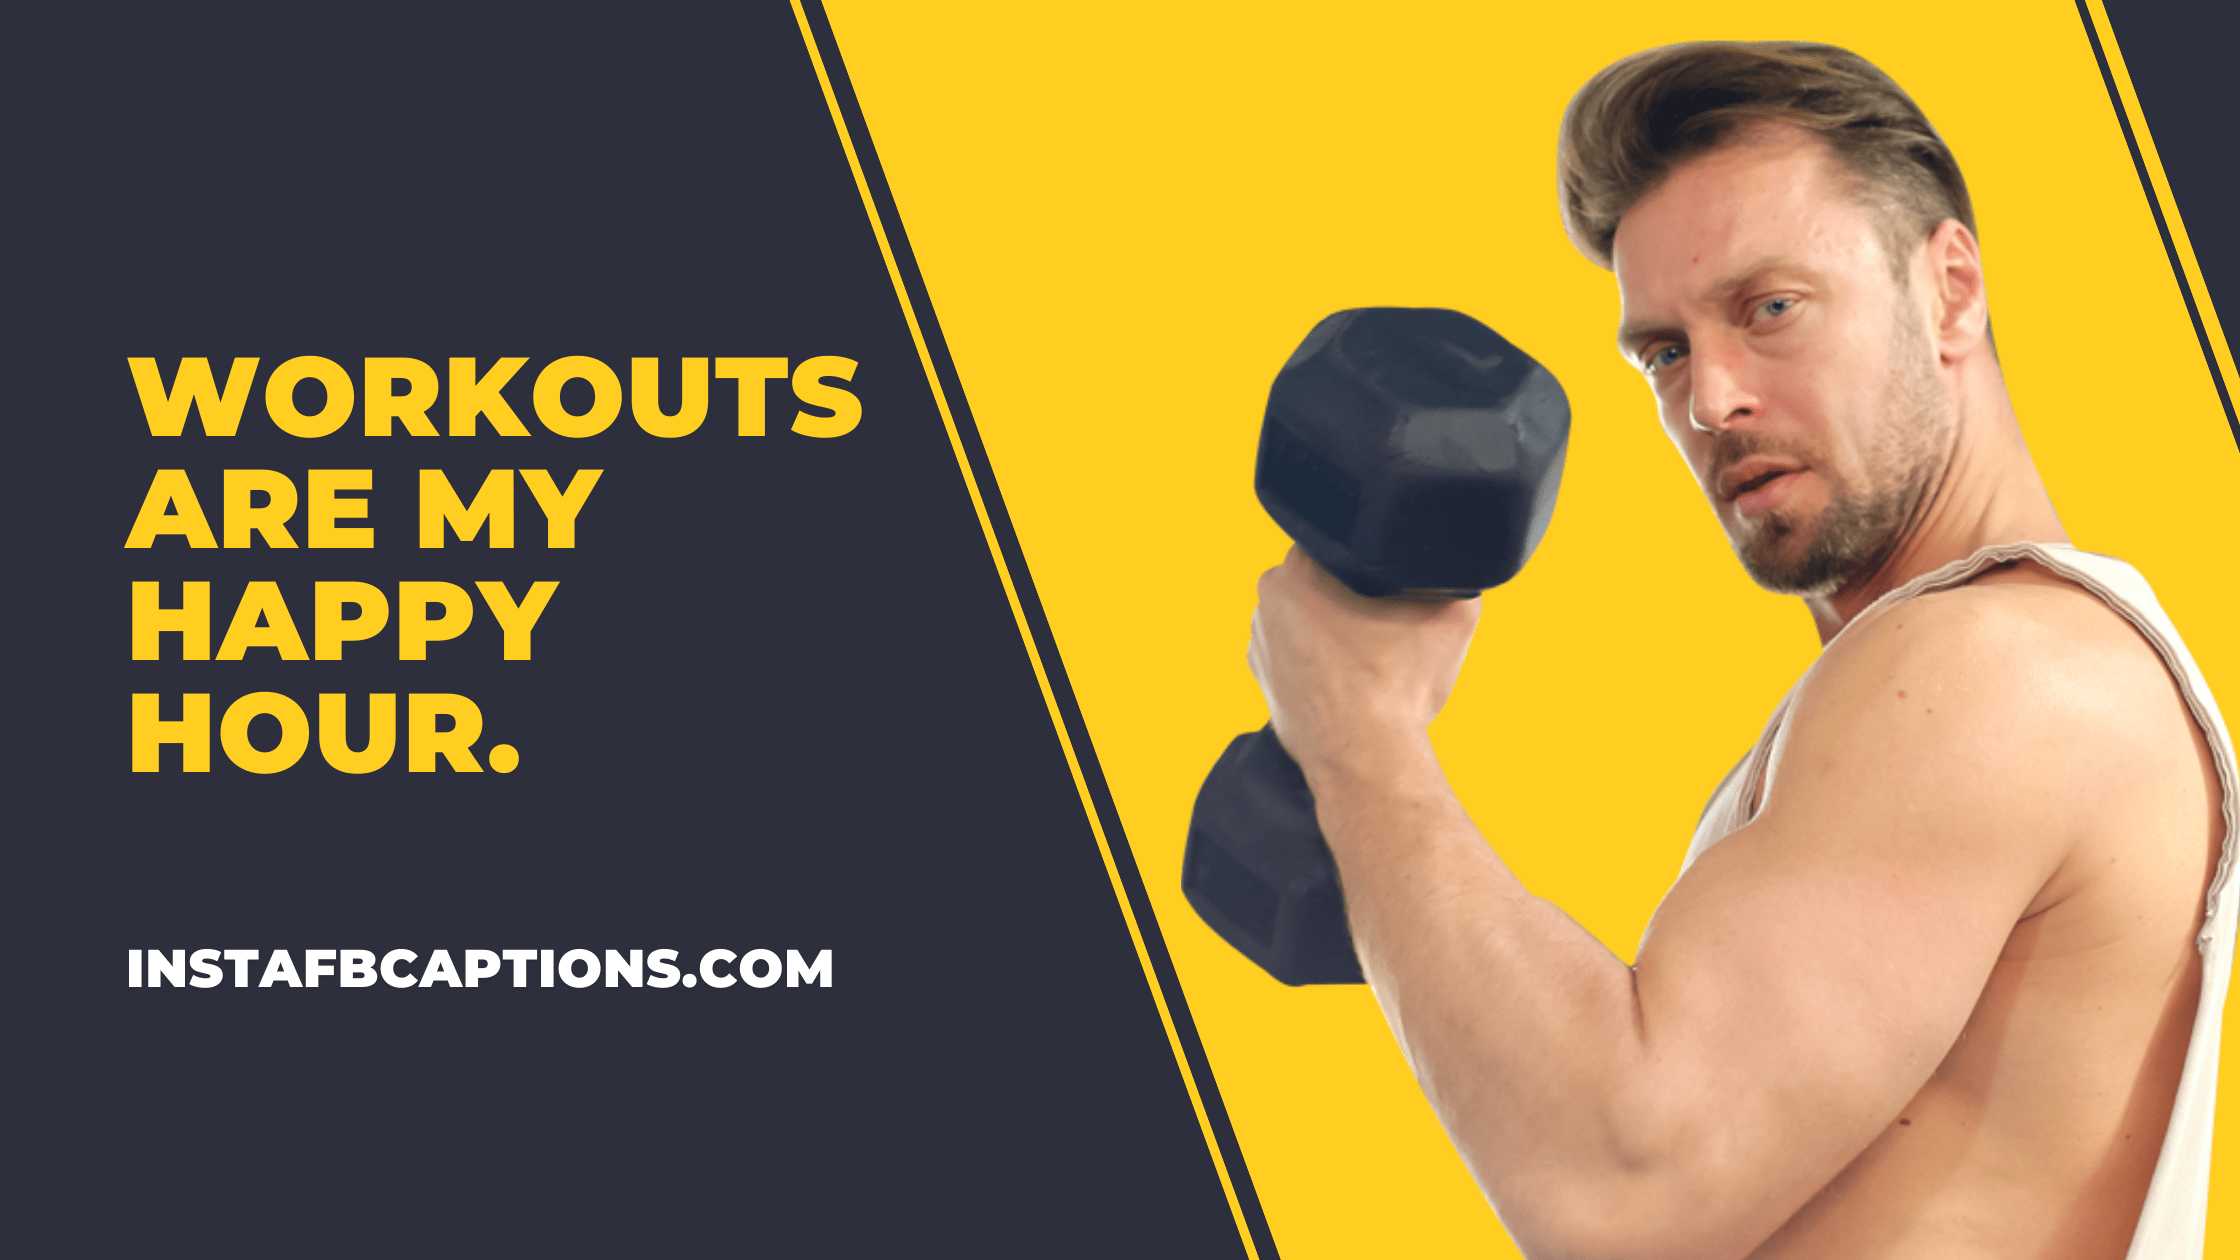 Workouts are my happy hour. gym captions - Gym Captions for Workout Selfies - [NEW] Best Gym/Workout Captions for your Instagram Selfies 2023